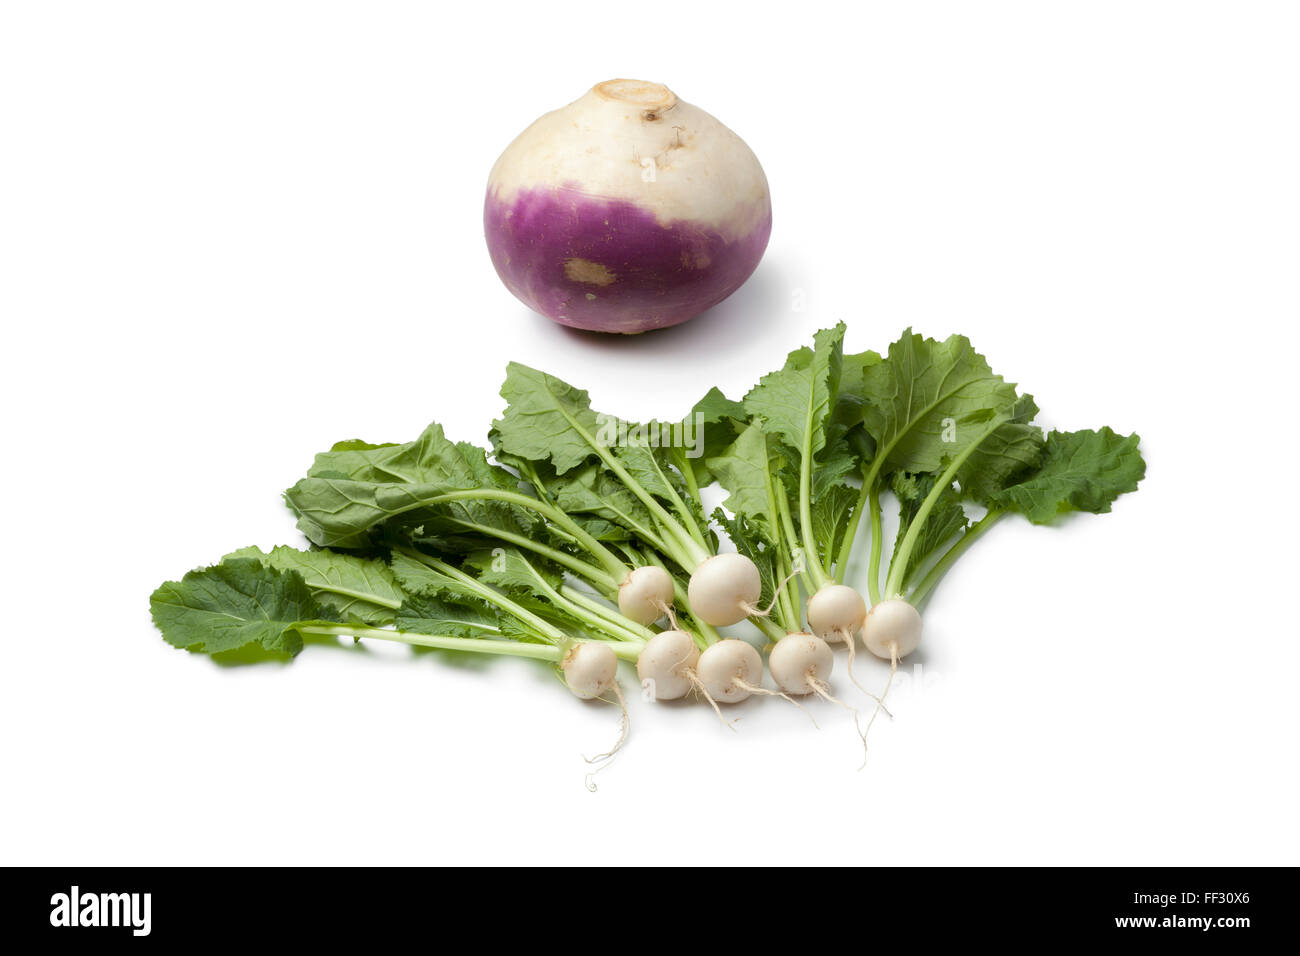 Fresh baby turnip and a large one to see the difference in size on white background Stock Photo